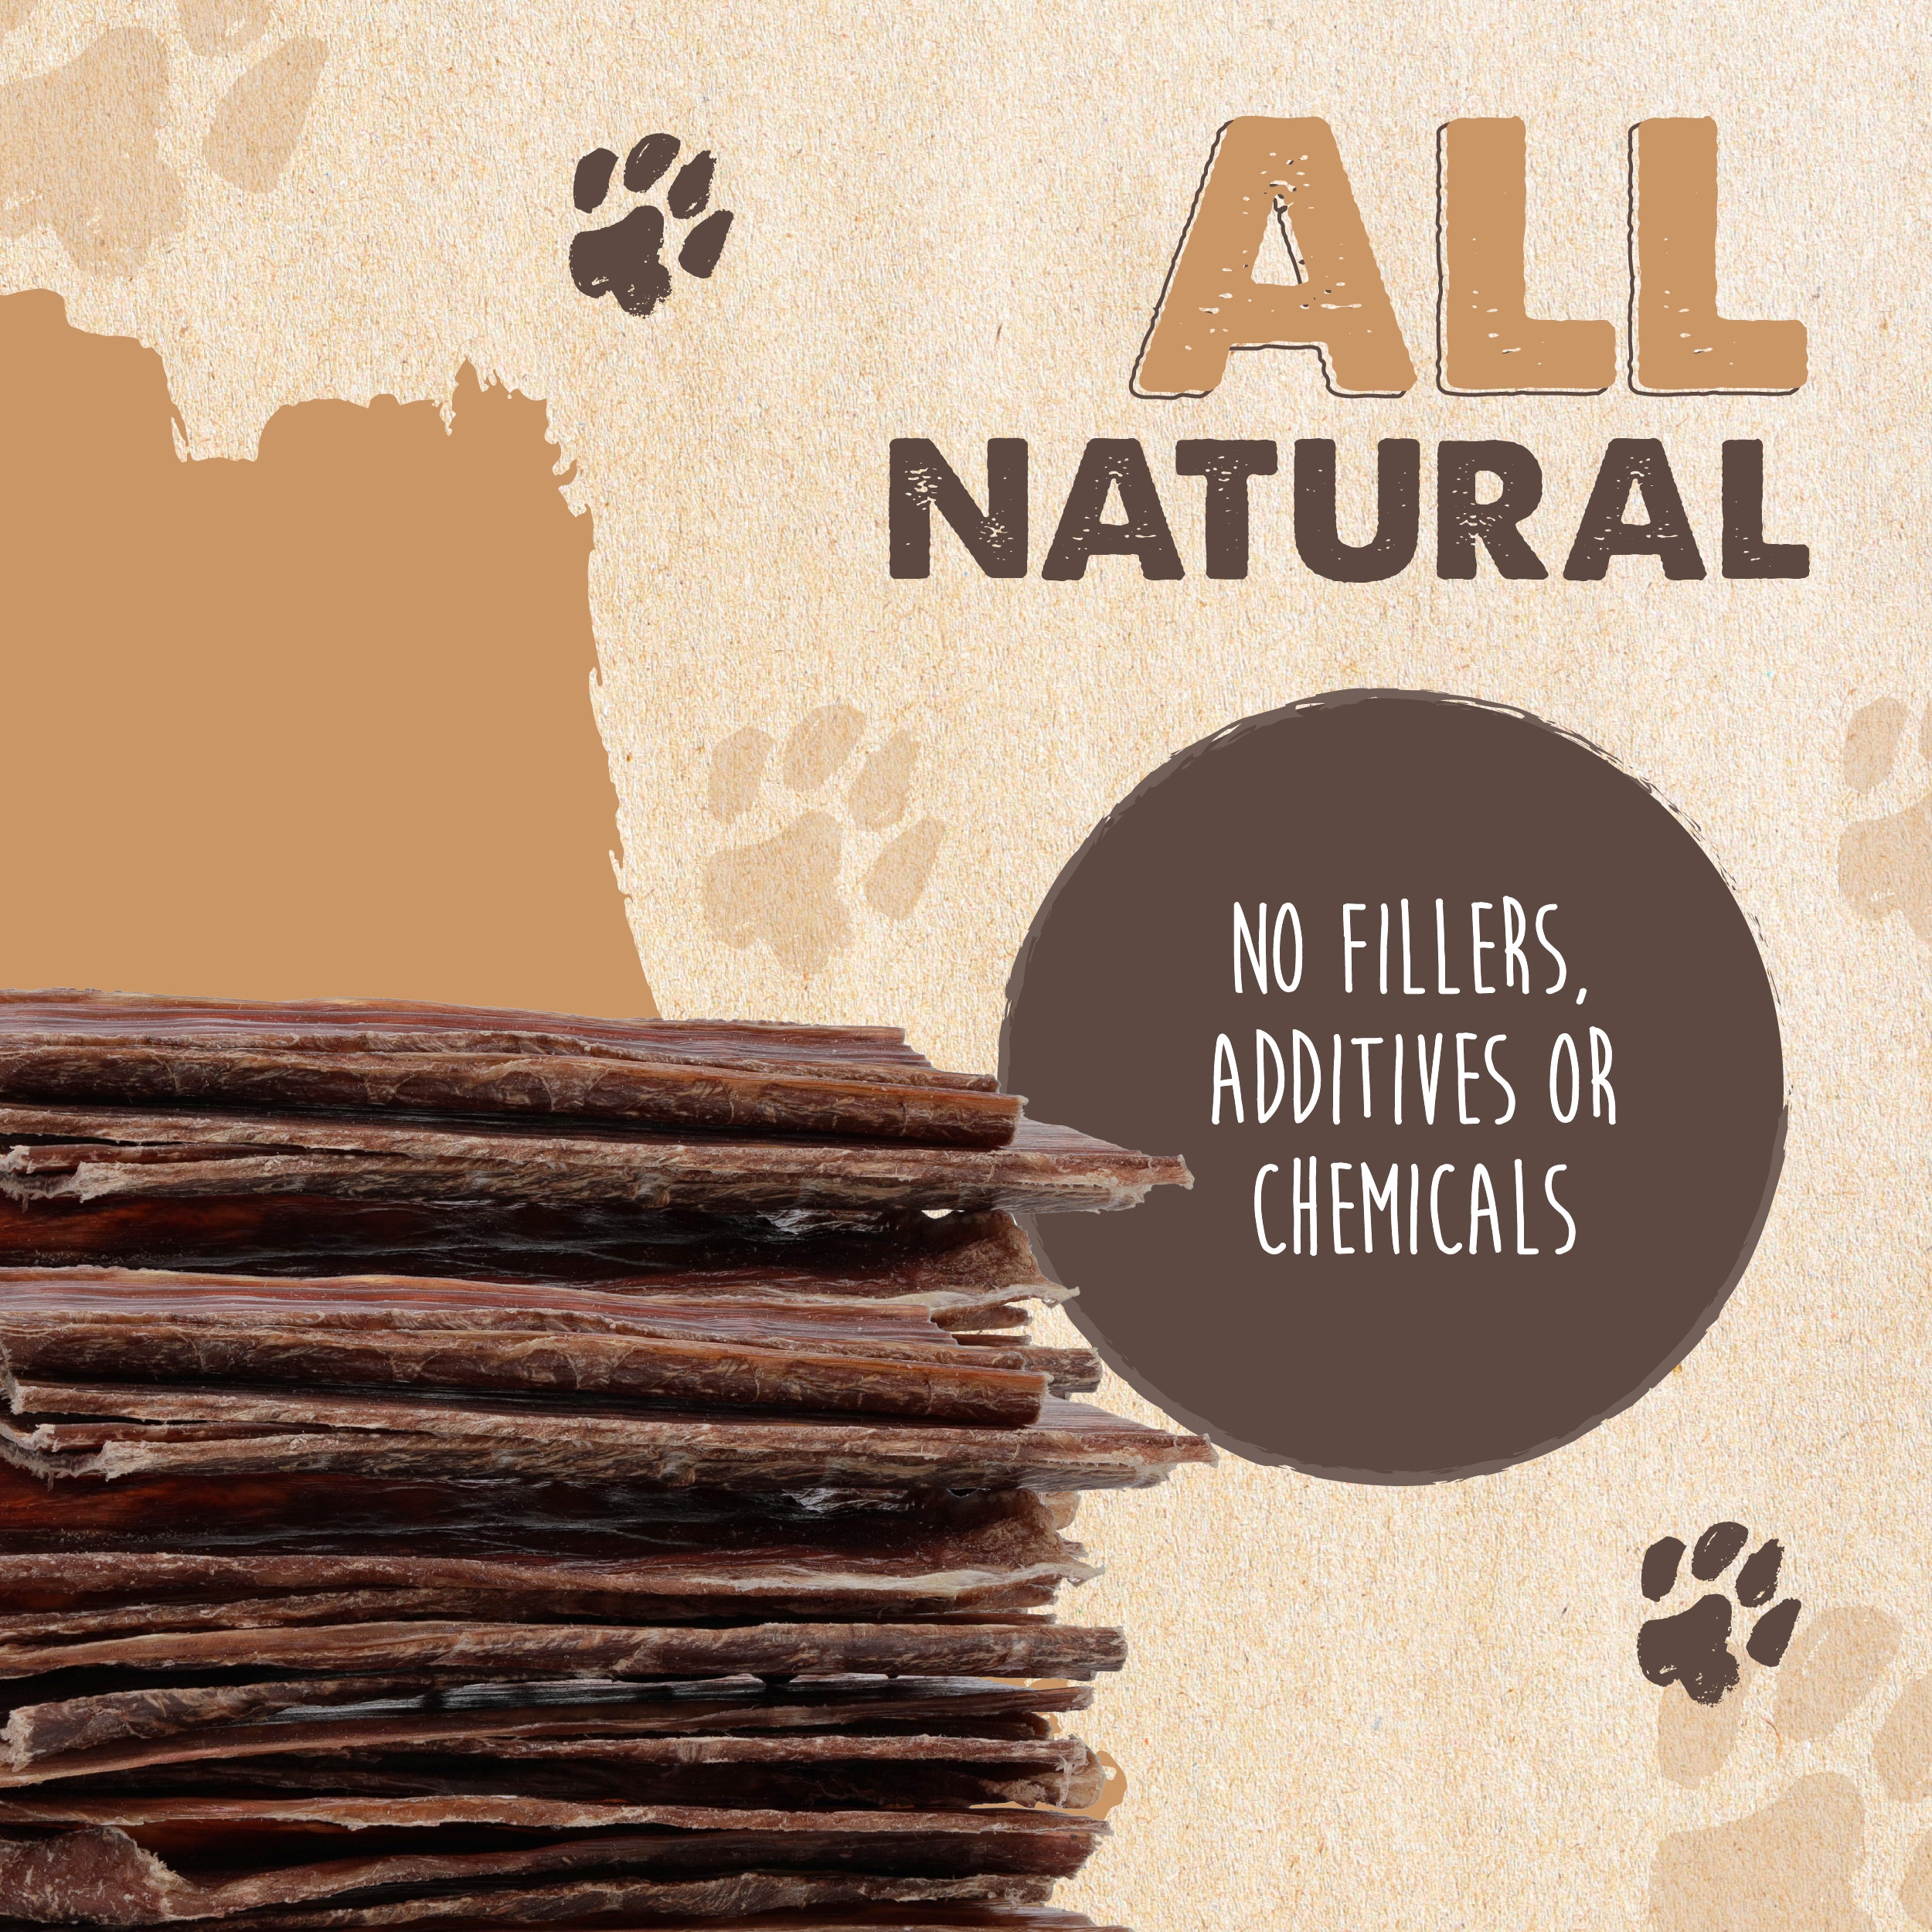 All-Natural Beef Gullet Jerky for Dogs